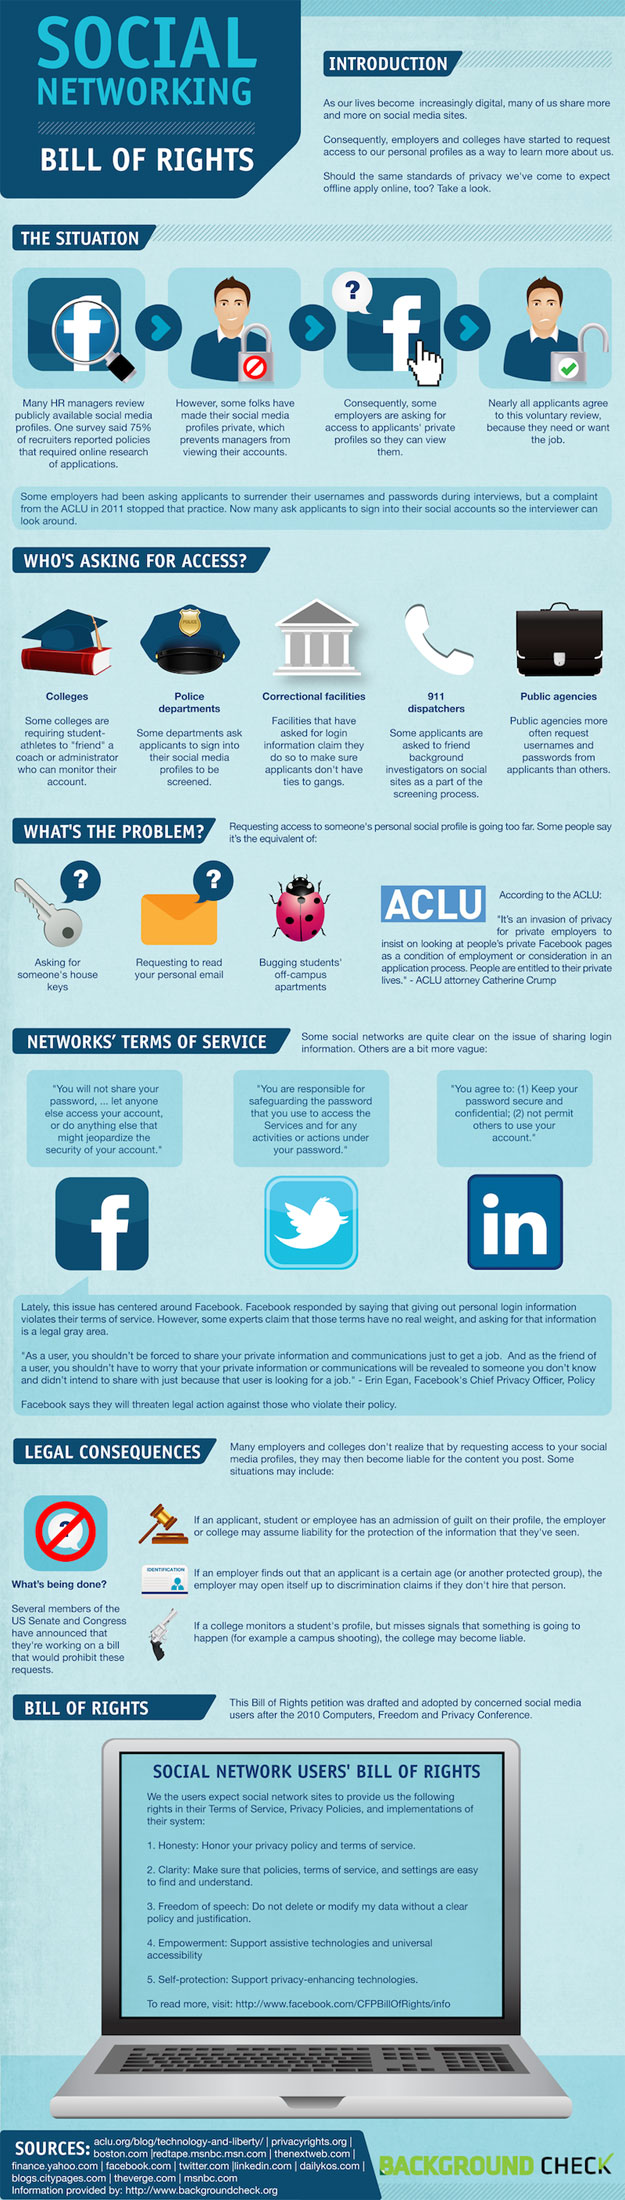 Social-Networking-Rights-Infographic